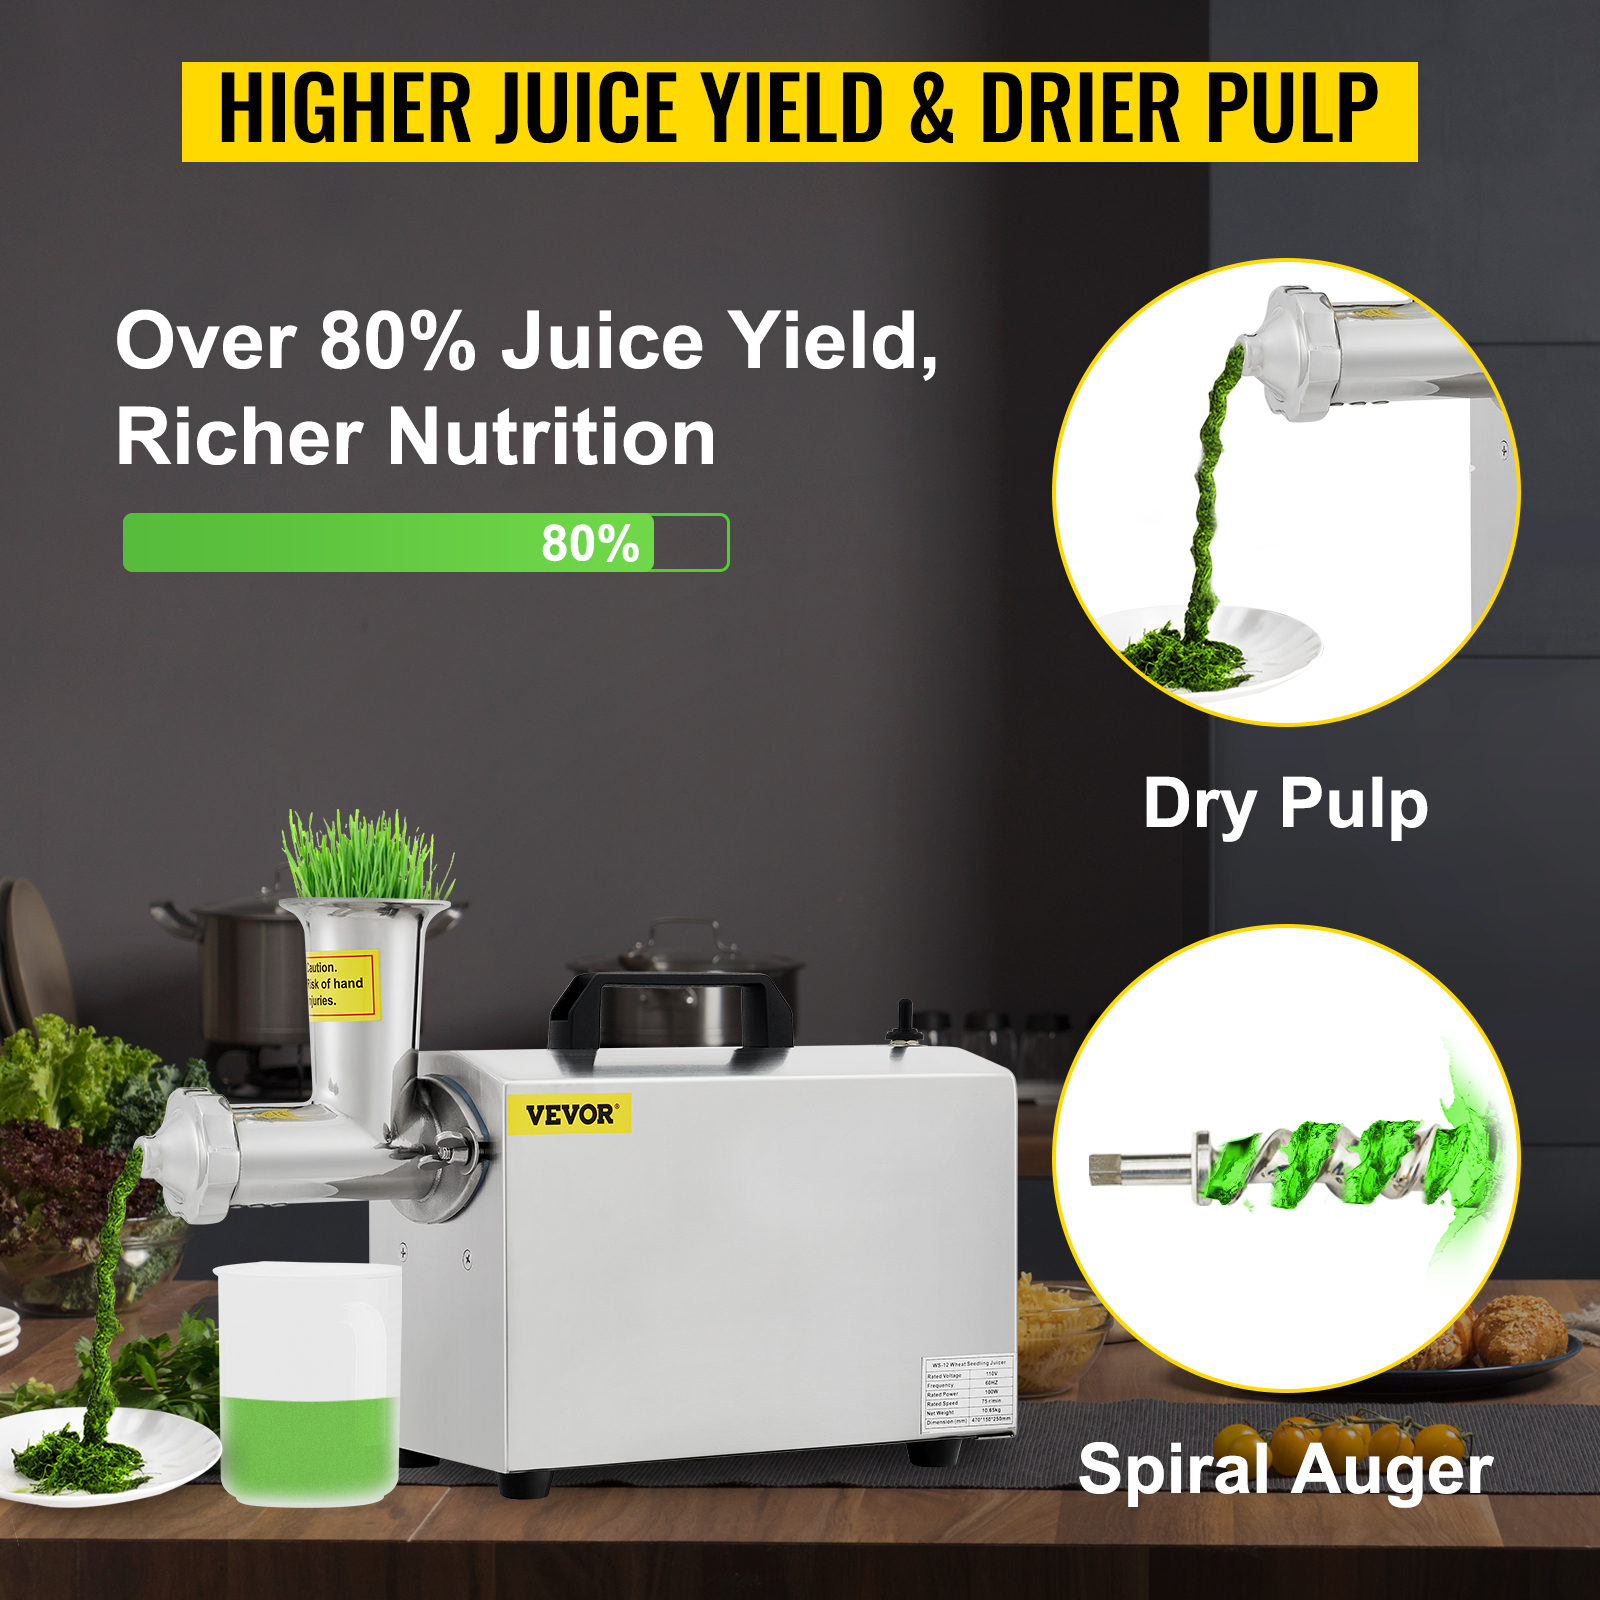 VEVOR Commercial Wheatgrass Juicing Machine, 80% Juice Yield, Slow